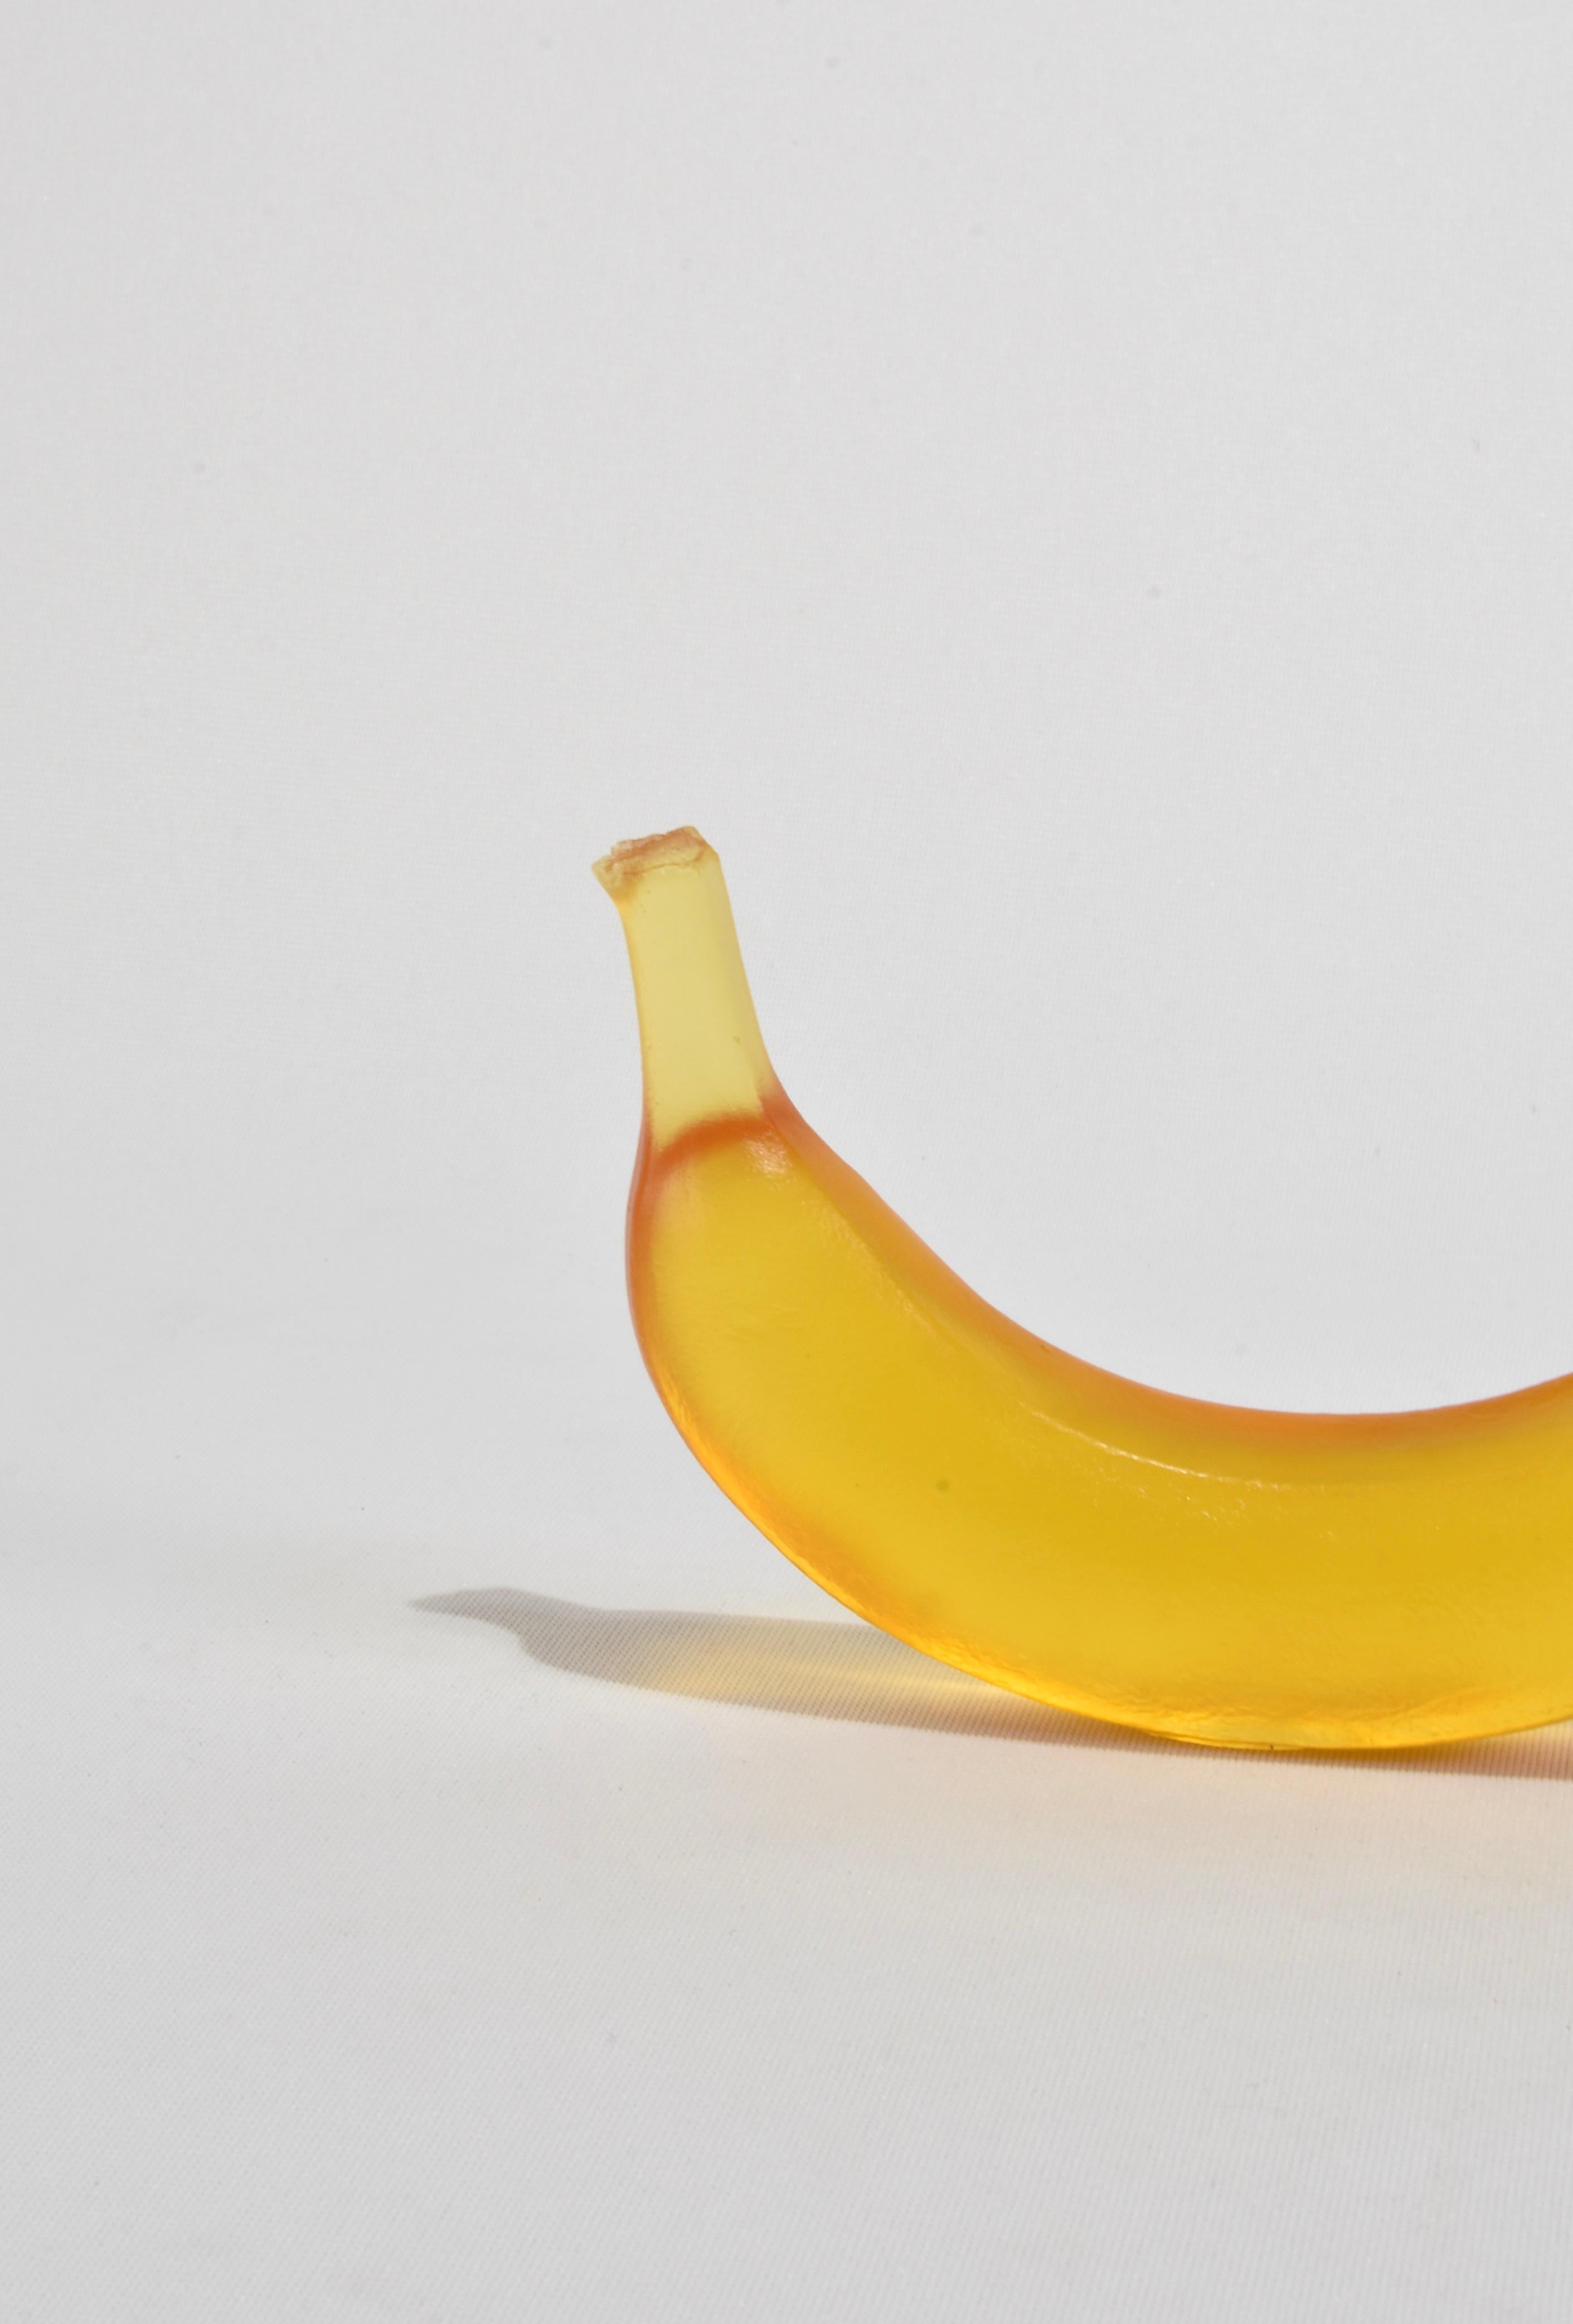 Hand-Crafted Glass Banana in Honey